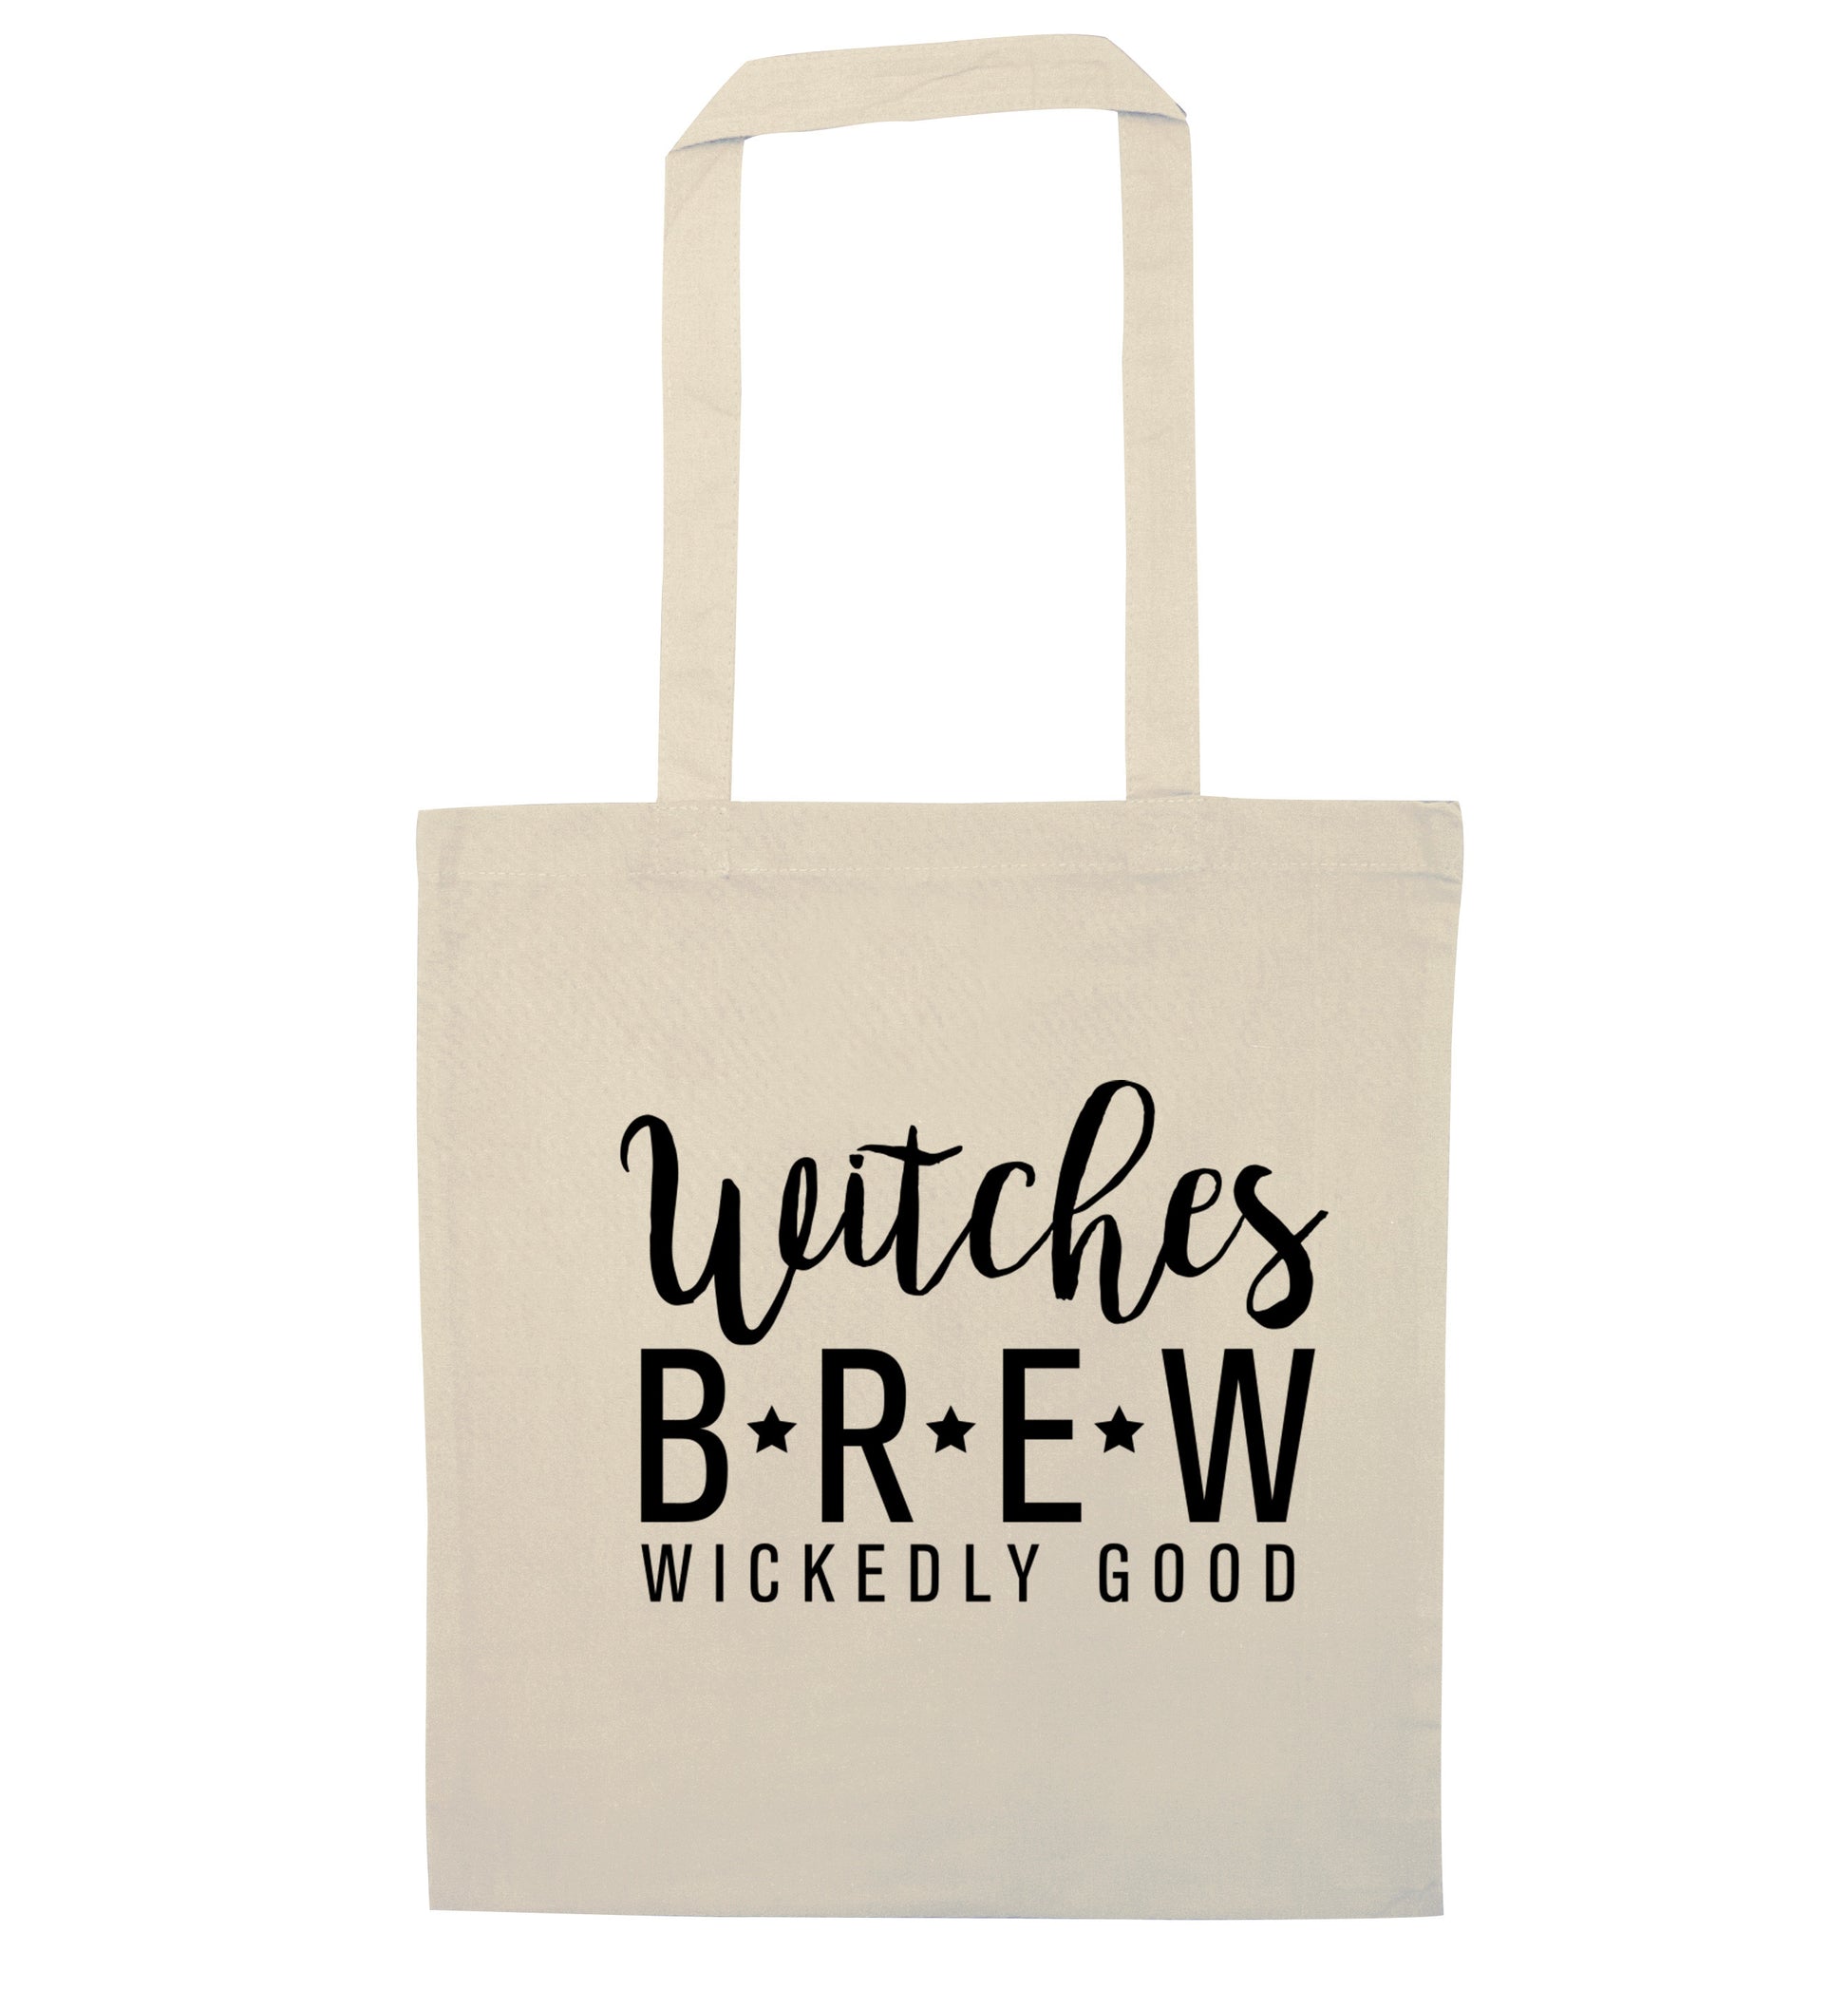 Witches Brew wickedly good natural tote bag